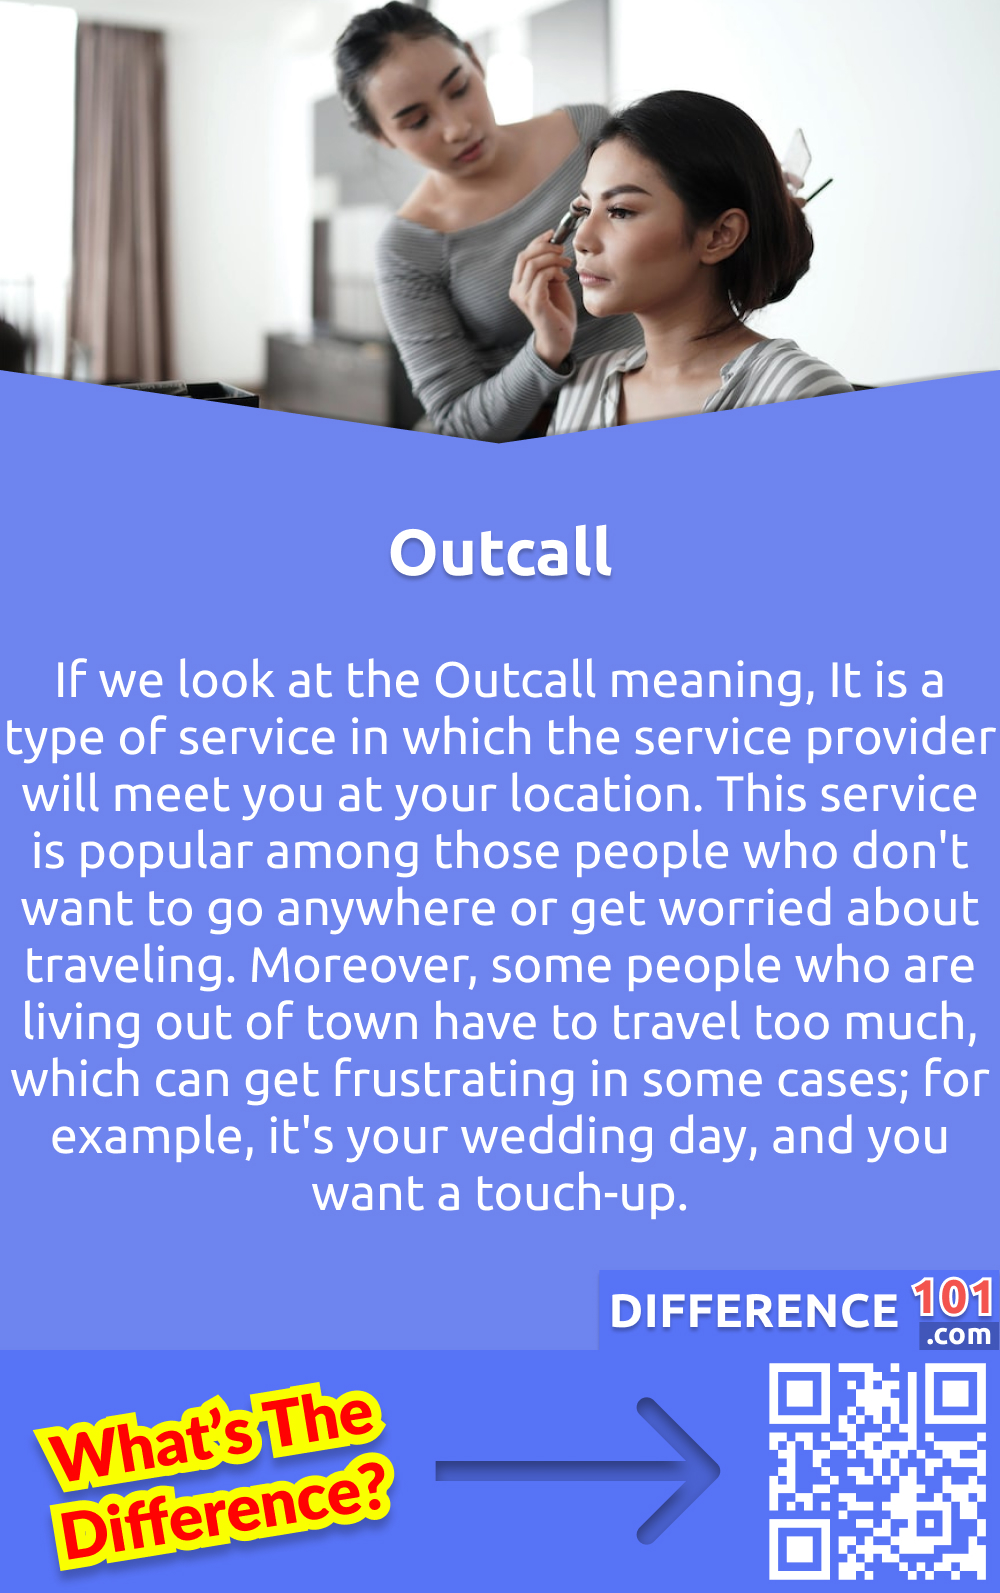 What Is An Outcall? If we look at the Outcall meaning, It is a type of service in which the service provider will meet you at your location. This service is popular among those people who don't want to go anywhere or get worried about traveling. Moreover, some people who are living out of town have to travel too much, which can get frustrating in some cases; for example, it's your wedding day, and you want a touch-up. It would be really awkward to go out of town to get your makeup services with your wedding service. So, in this case, an outcall service works well. Moreover, outcall services also save the traveling cost, and you get all the service you want at your home in a comfortable environment.